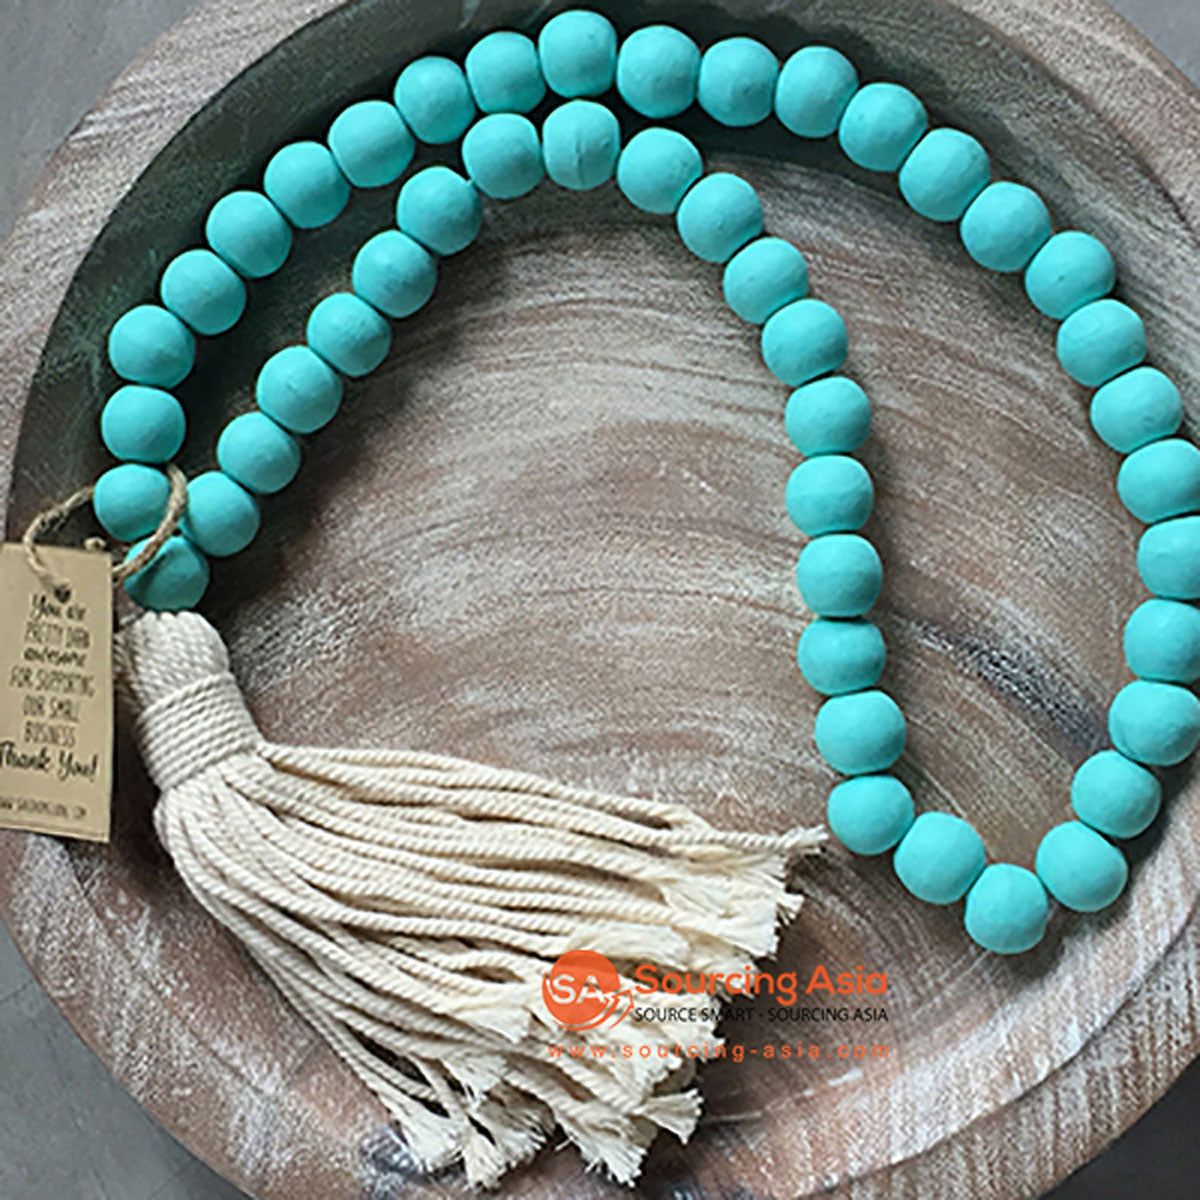 SHL047-1 TURQUOISE TIMBER BEADS DECORATIVE TASSEL WITH WHITE GARLAND